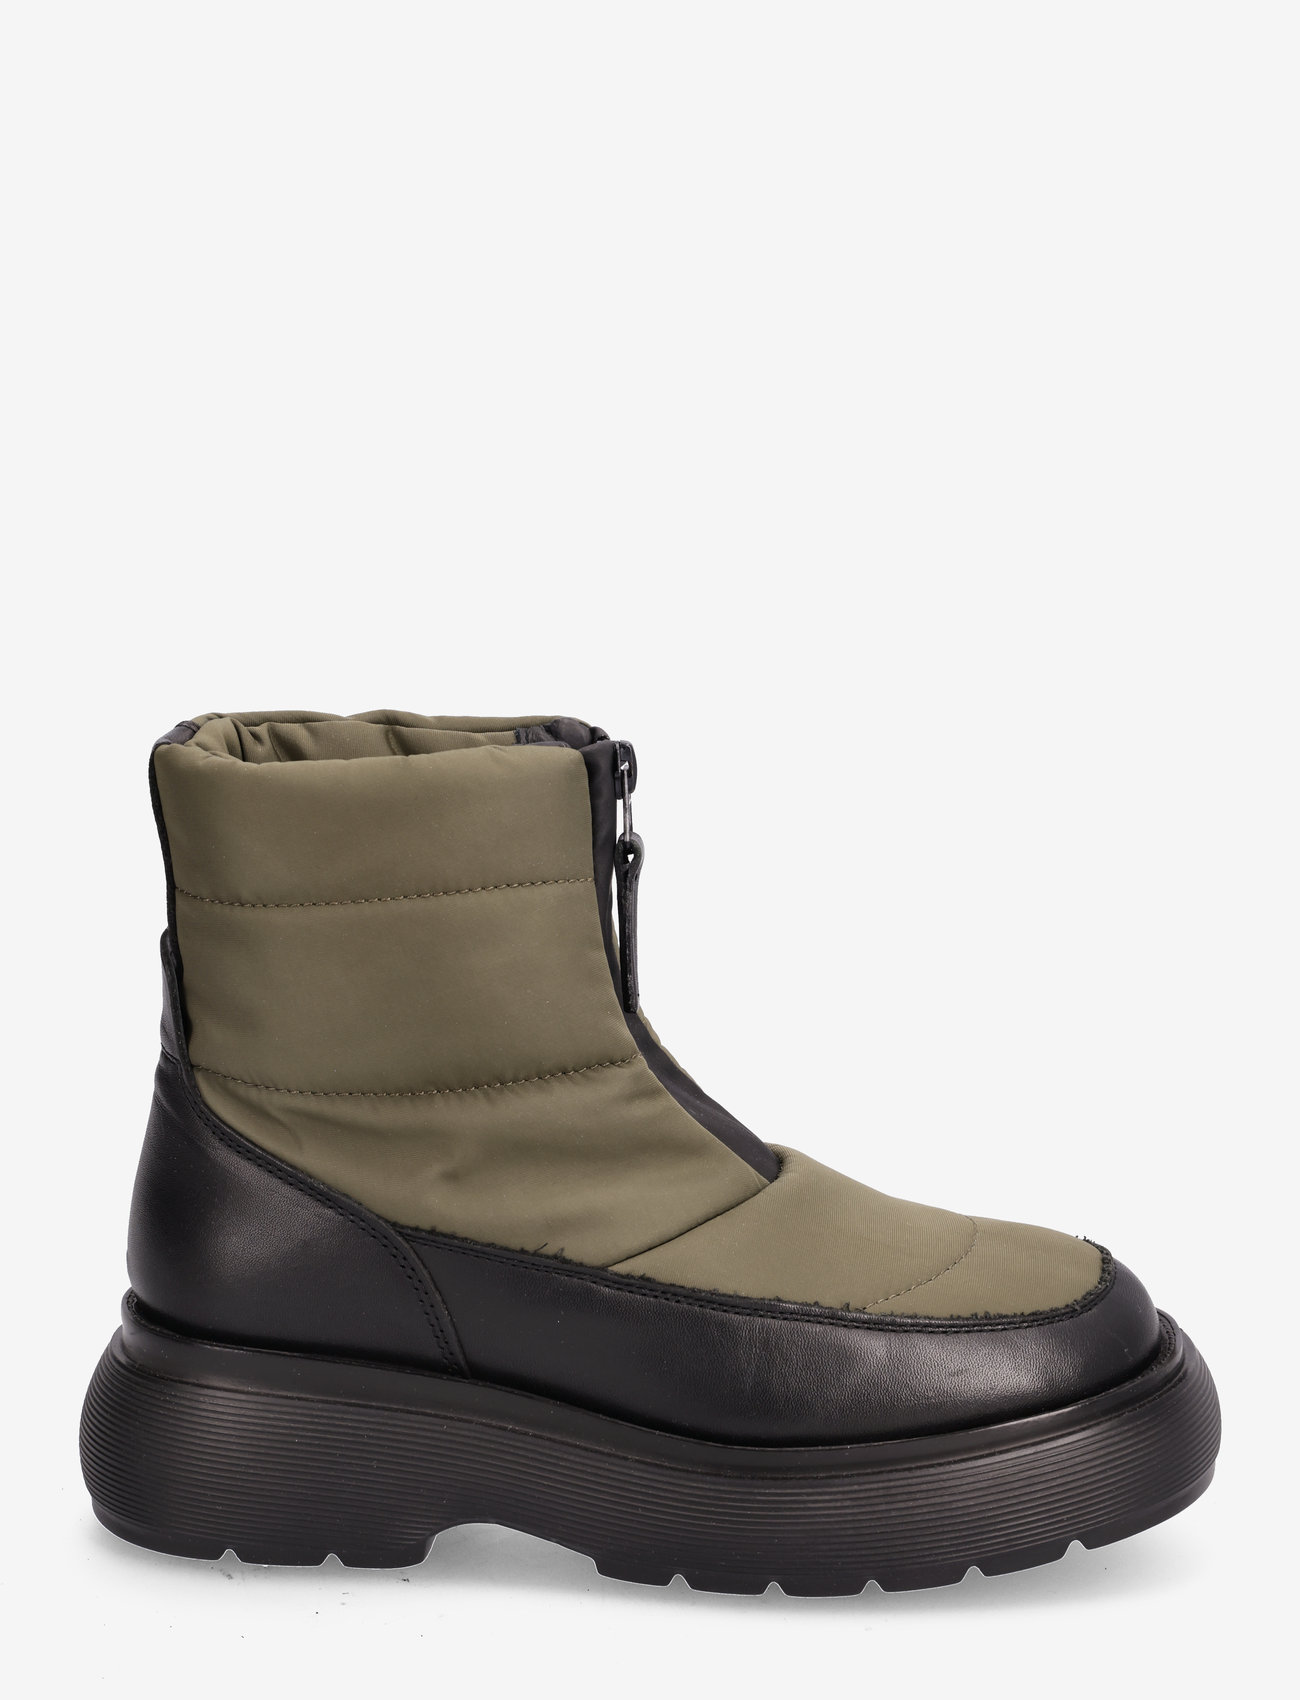 Garment Project - Cloud Snow Boot - Army Nylon - women - army - 1